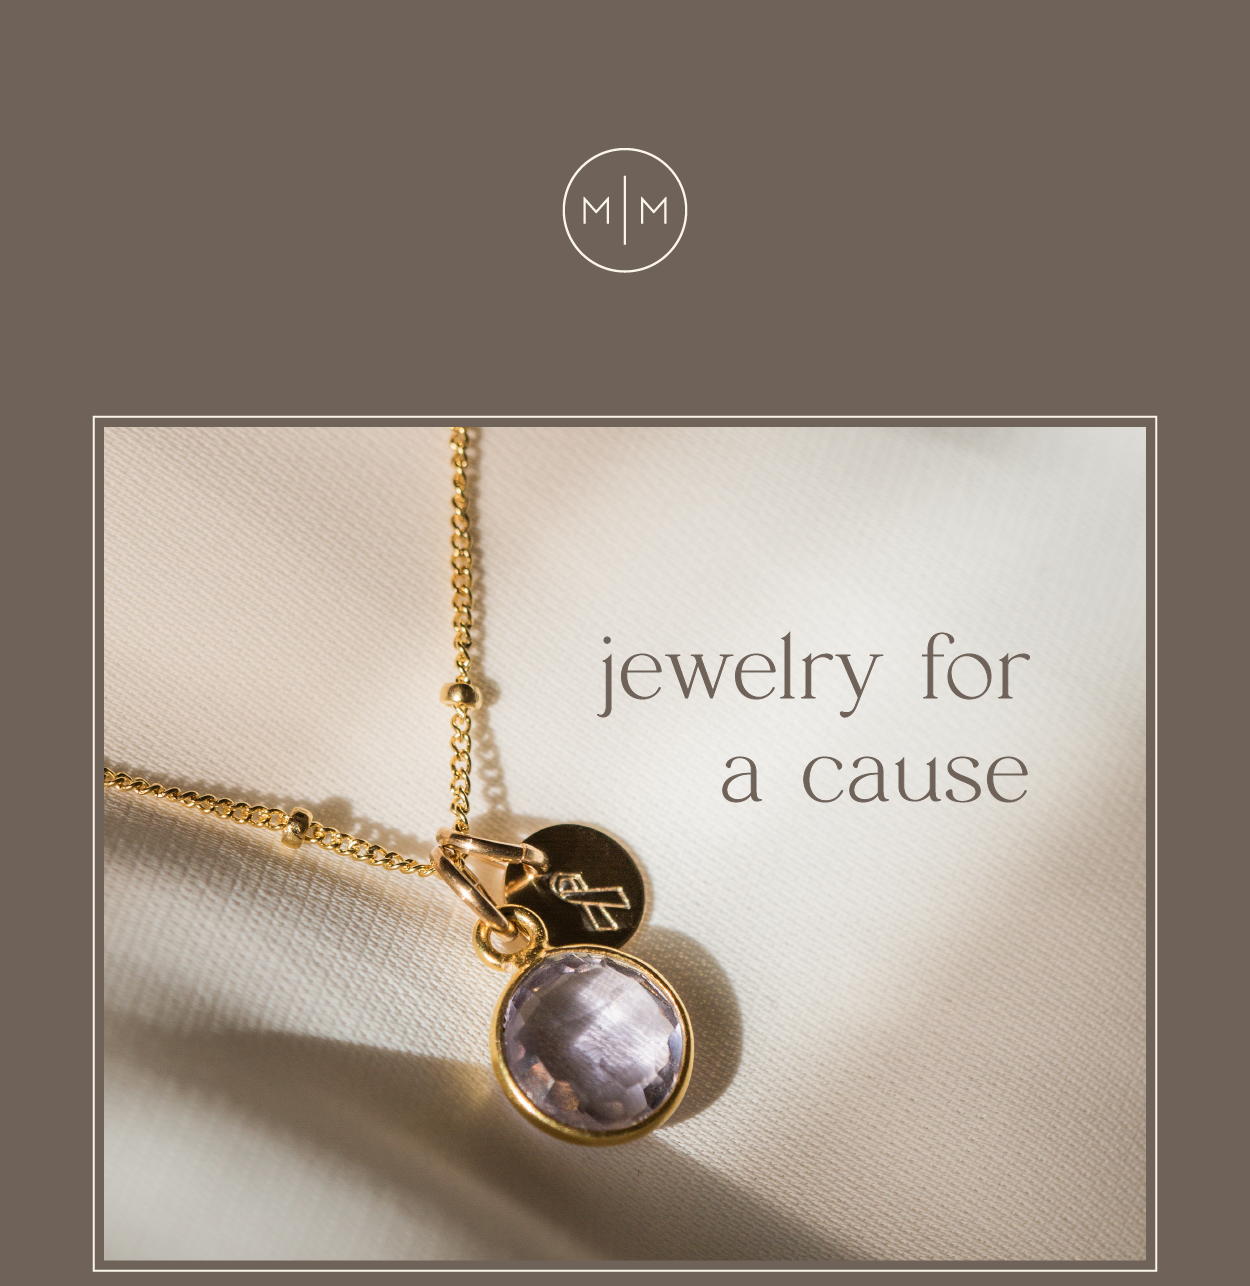 Jewelry for a cause